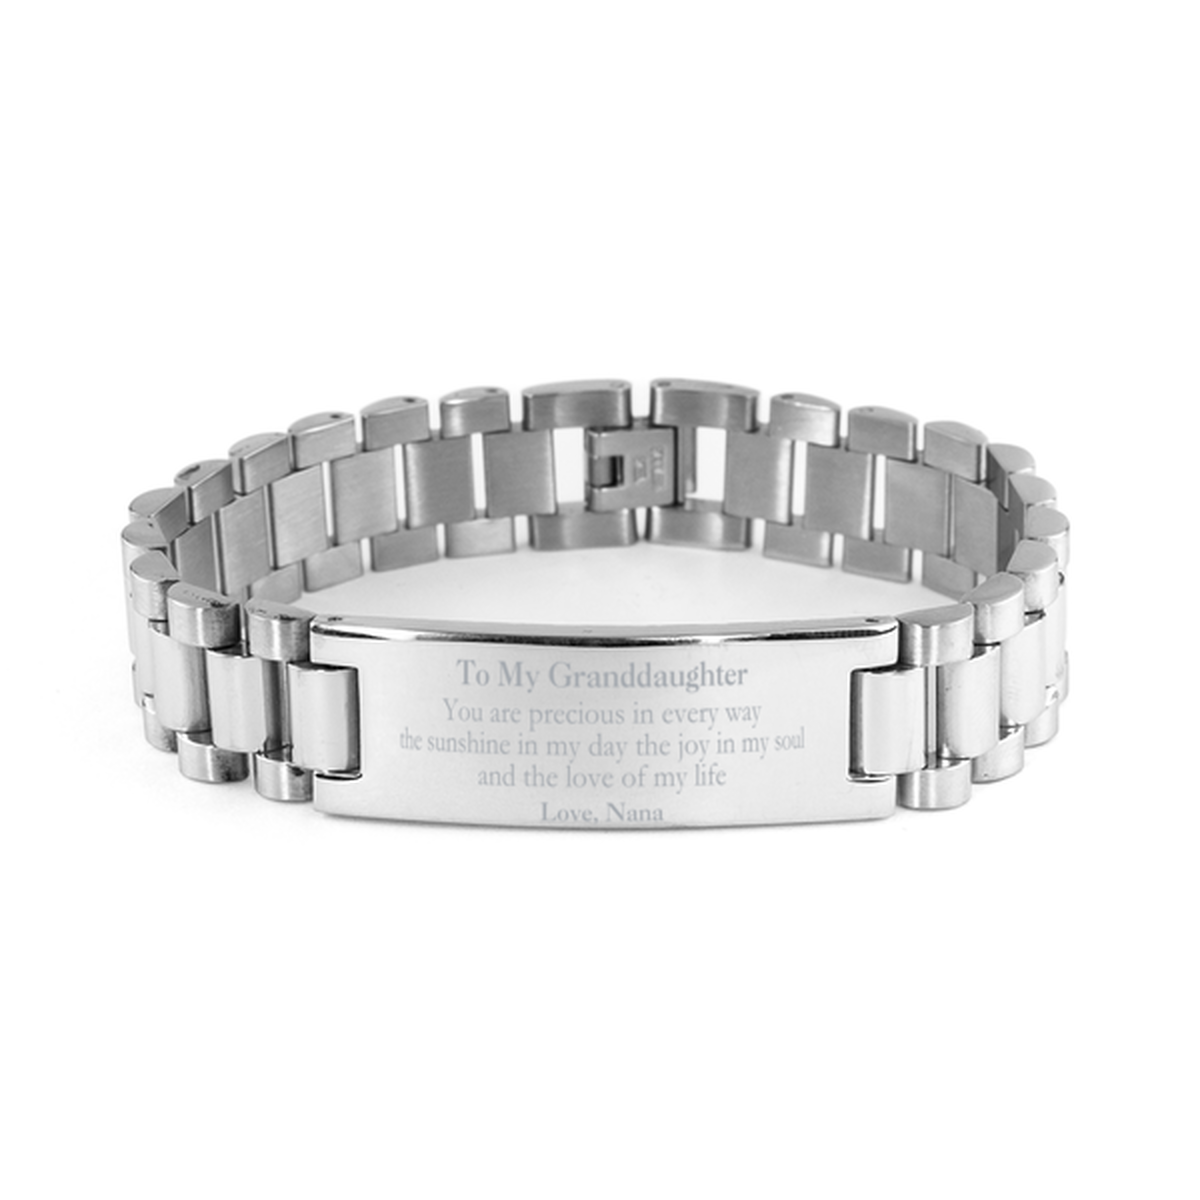 Graduation Gifts for Granddaughter Ladder Stainless Steel Bracelet Present from Nana, Christmas Granddaughter Birthday Gifts Granddaughter You are precious in every way the sunshine in my day. Love, Nana